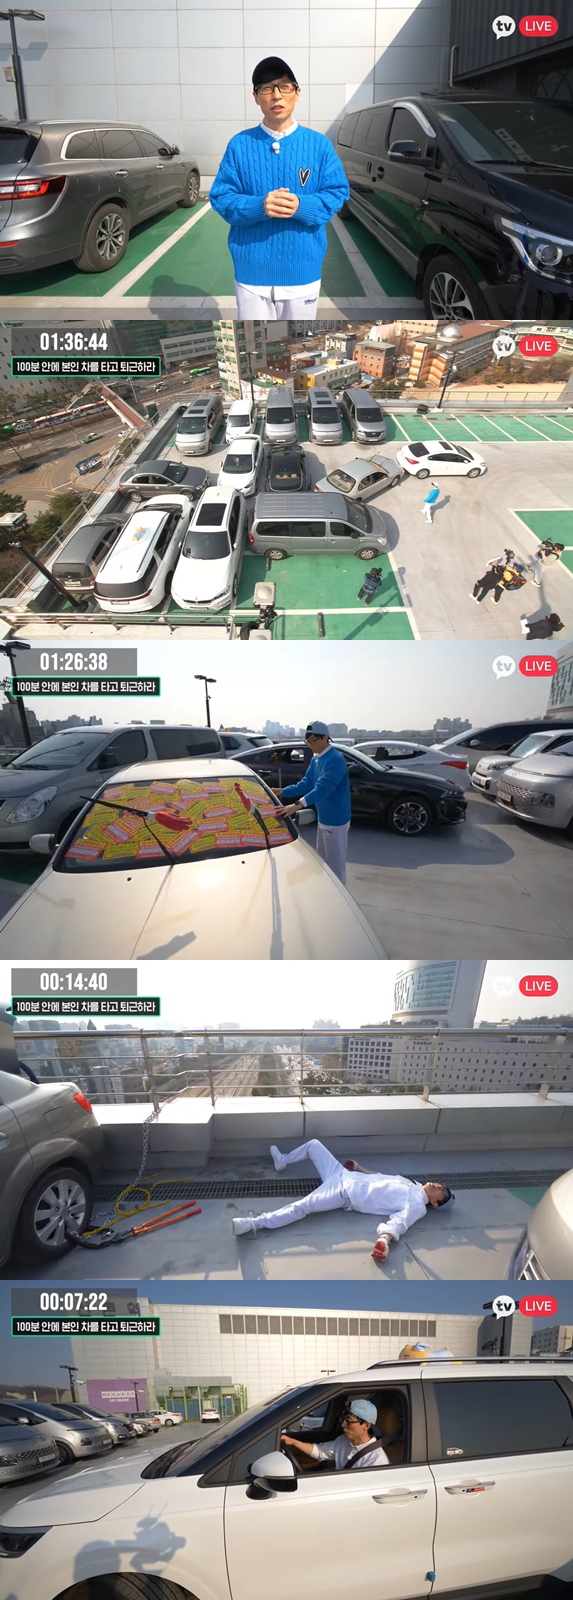 Yoo Jae-Suk successfully finished the second mission.On the 22nd, KakaoTV original play oil, Yoo Jae-Suk met with viewers through live broadcasts.On this day, Yoo Jae-Suk was given a mission to take his car in 100 minutes and leave.Yoo Jae-Suk said, There is nothing to lose by listening to others, but in the comment Stop talking, he laughed back, How do you shut up?Yoo Jae-Suk began pulling out one by one of the stacked cars: Yoo Jae-Suk said, Im a chazzalalal; when you look at the car keys, you know exactly what the car is.I have a car, he said.Yoo Jae-Suk, who continued to move the car, said, Its too hot, so there was a little struggle with the stylist earlier, its too hot.The next car was missing the Kumho Tire.Yoo Jae-Suk, who saw this, said, I once went to Kumho Tire in a rainy rainstorm because of the Kumho Tire punk. Dont worry about this.Its not hard to find out, he said, starting the Kumho Tire replacement.Yoo Jae-Suk, who took a long time to go to Kumho Tire, moved the car with his extraordinary driving skills.Driving should not be self-conscious, no matter how good it is, Yoo Jae-Suk stressed.Next car is oil-deprived. Why is he in here? Why is he here? Is not it a sketchbook today?The antenna office is also narrow, but I want to park it later. Yoo Jae-Suk then found a gas station to buy oil; the last car was tied up with a hard iron wire.Yoo Jae-Suk found a metal cutter, cut it, and then moved the car to draw admiration.Finally, Yoo Jae-Suk said, We have a little more than 10 minutes left - lets get out of work - that word that makes us excited, its work.In the meantime, Yoo Jae-Suk, who opened the car door, threw it between the cars and made viewers laugh; Yoo Jae-Suk said, Dont take it.I am a comedy, but I did not expect this situation at all. It was a real big deal. Yoo Jae-Suk made perfect mission with six minutes left; Yoo Jae-Suk finished the mission by sharing a closing greeting with viewers.Photo: KakaoTV broadcast screen